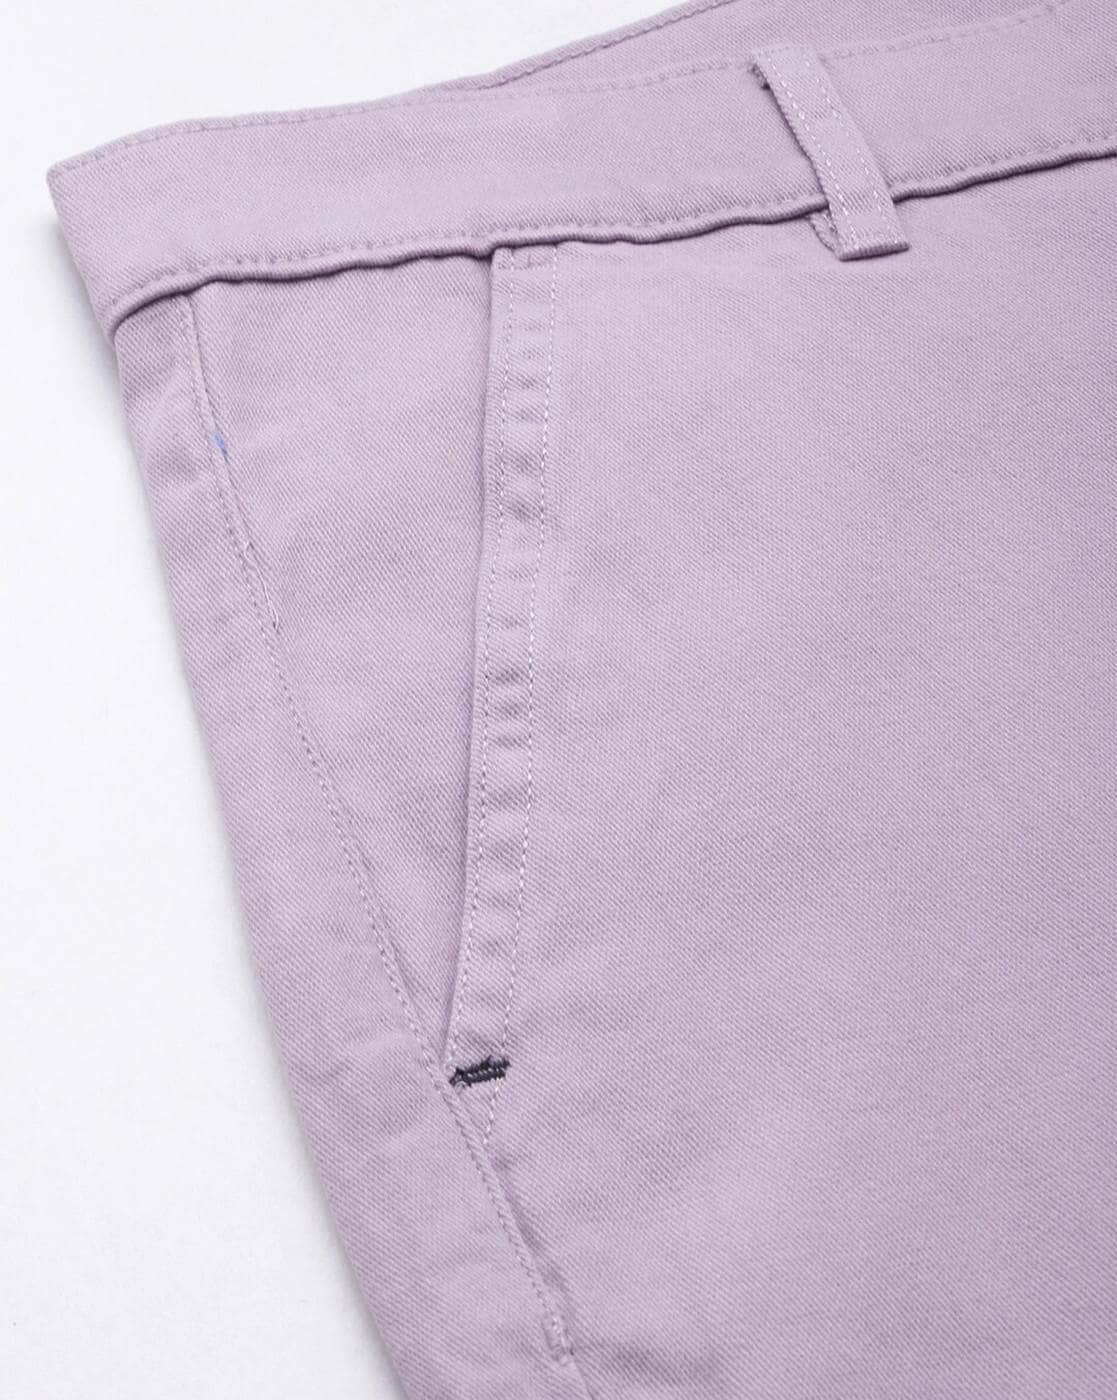 Cargo Trousers in Purple  53 products  FASHIOLAin